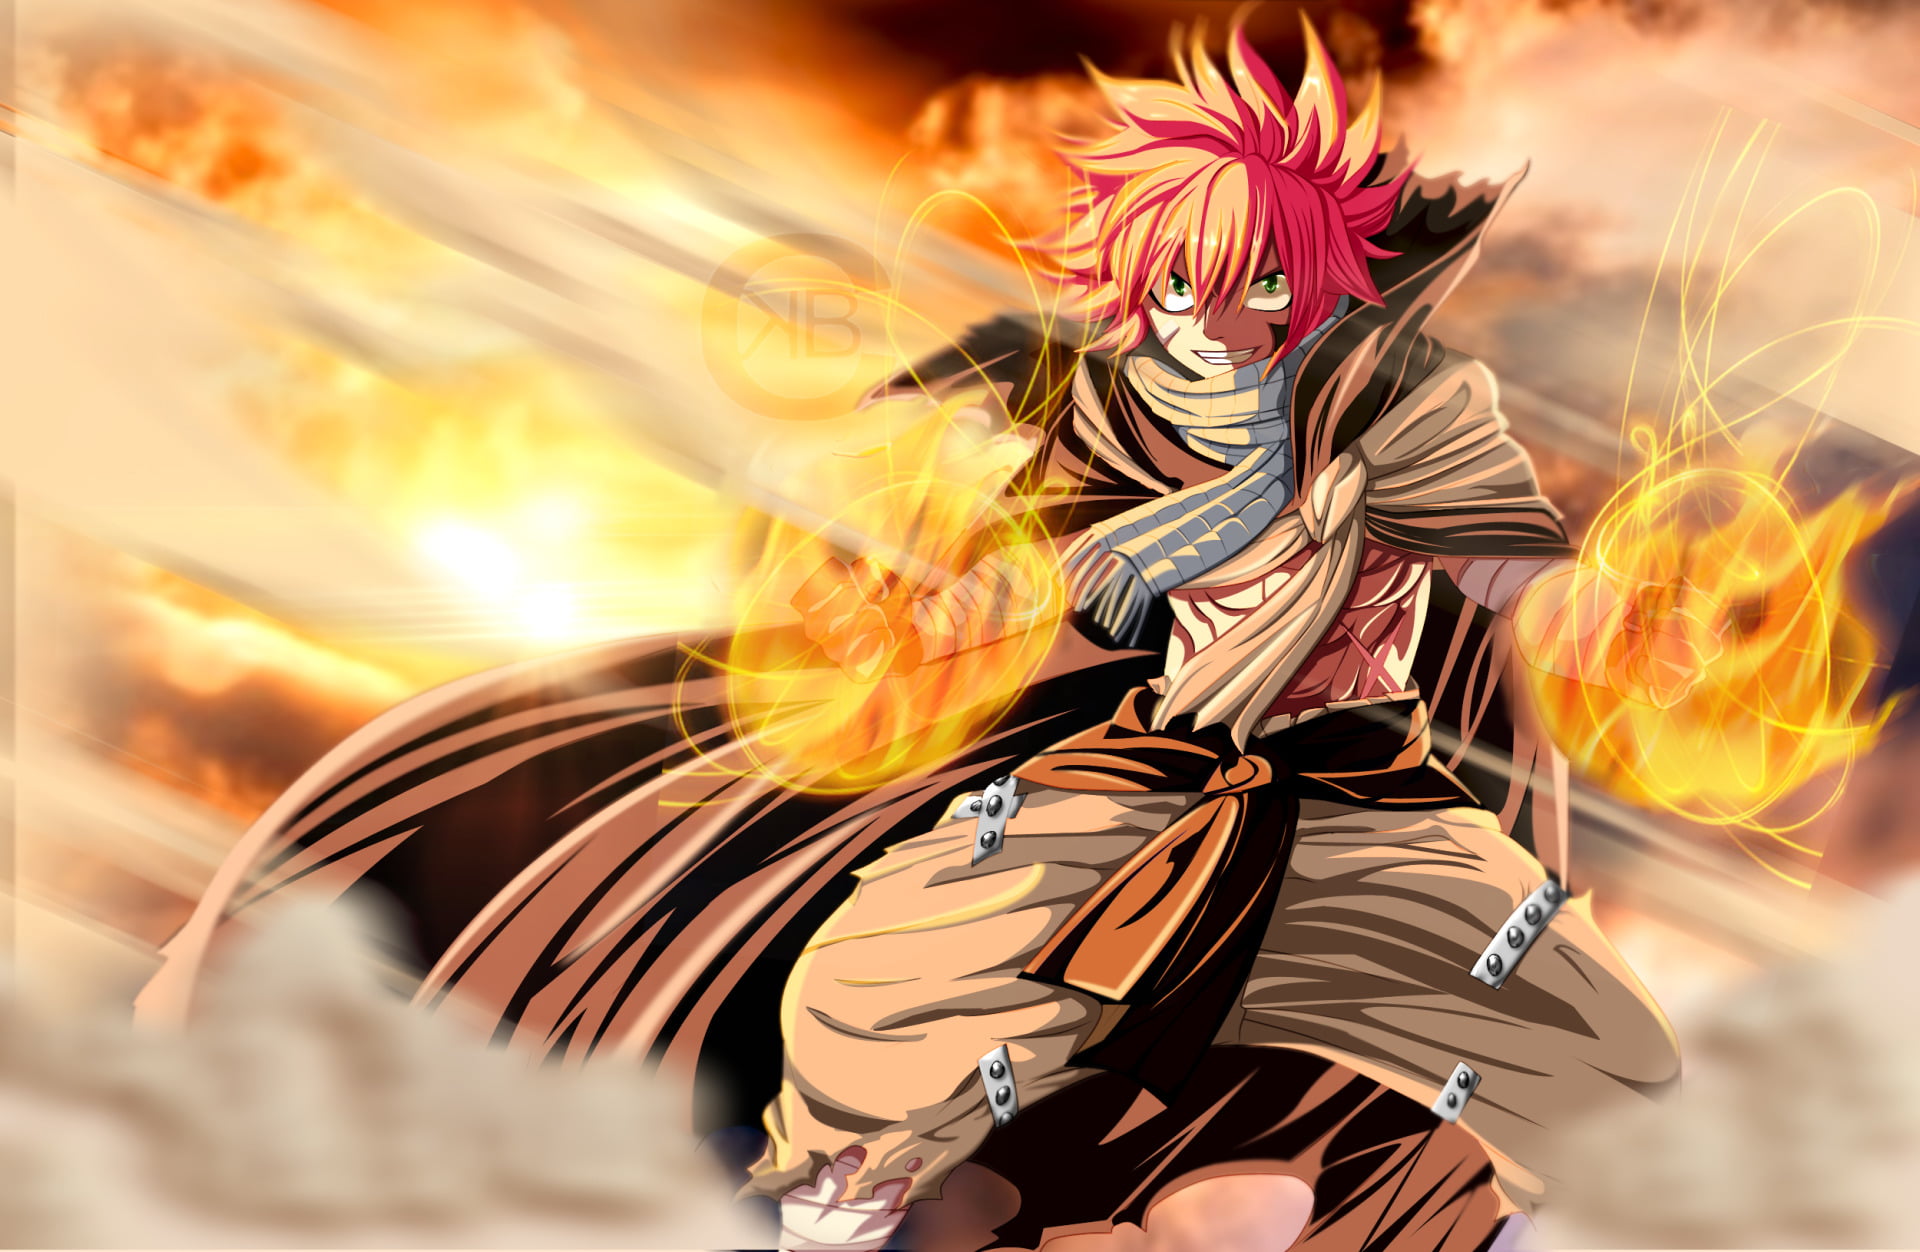 red haired male anime character wallpaper, Fairy Tail, Fire, Natsu Dragneel